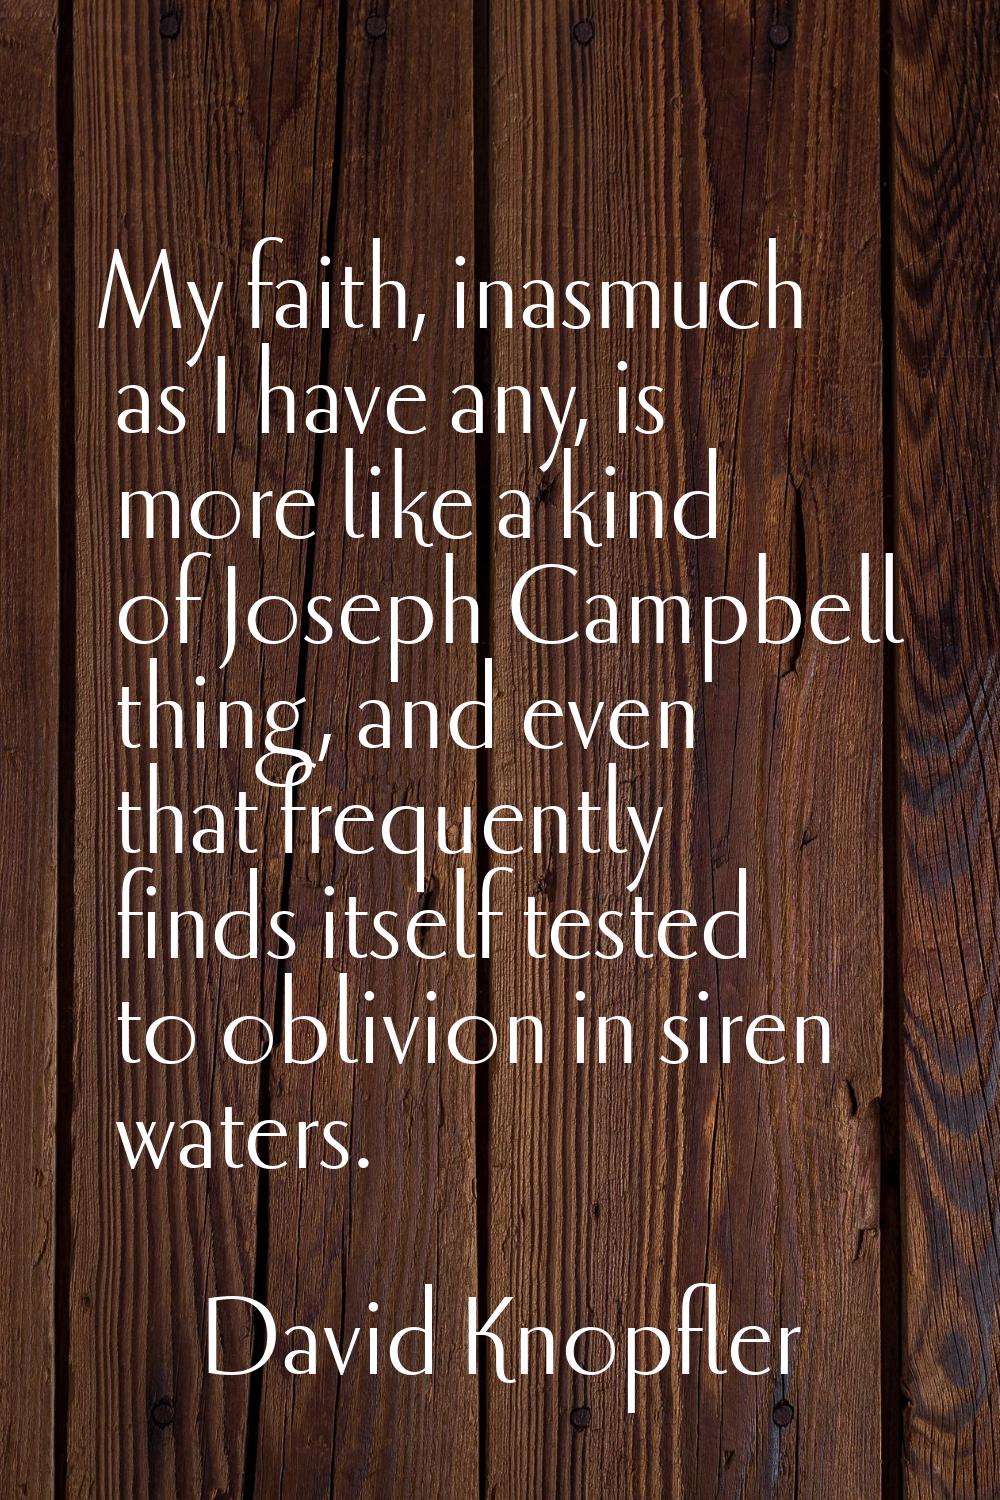 My faith, inasmuch as I have any, is more like a kind of Joseph Campbell thing, and even that frequ